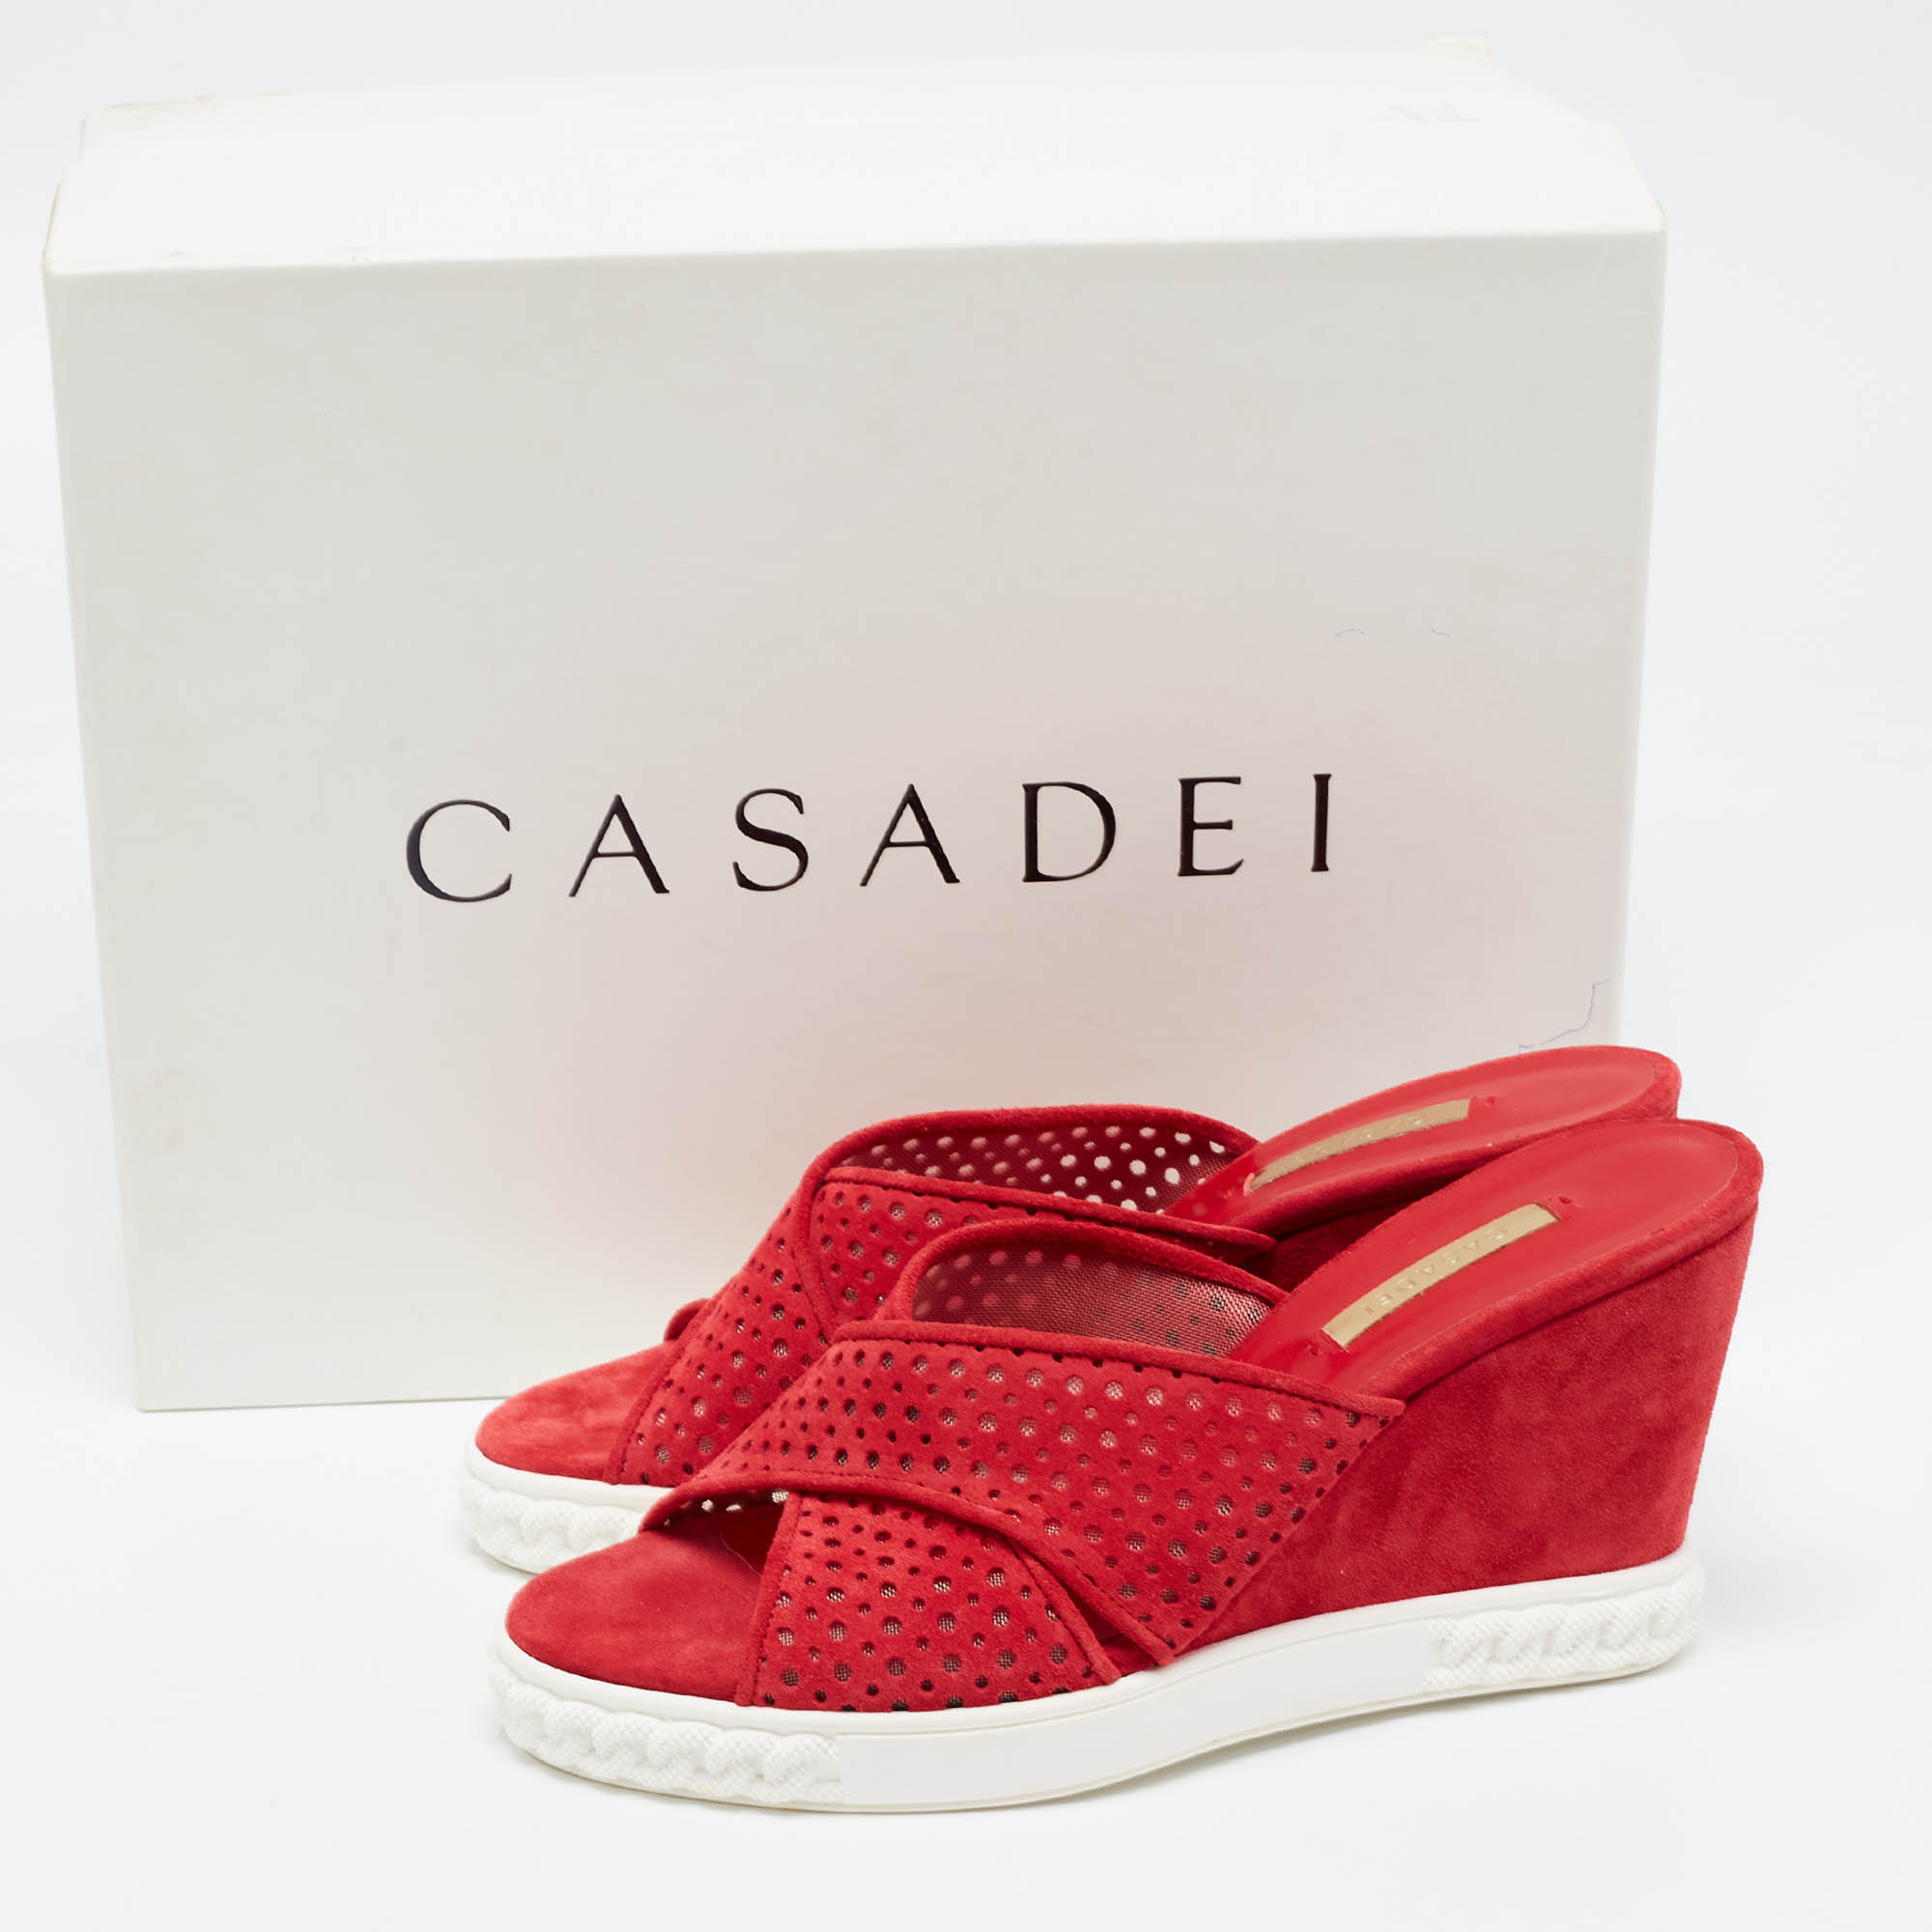 Casadei Red Suede Perforated Wedge Sandals Size 39